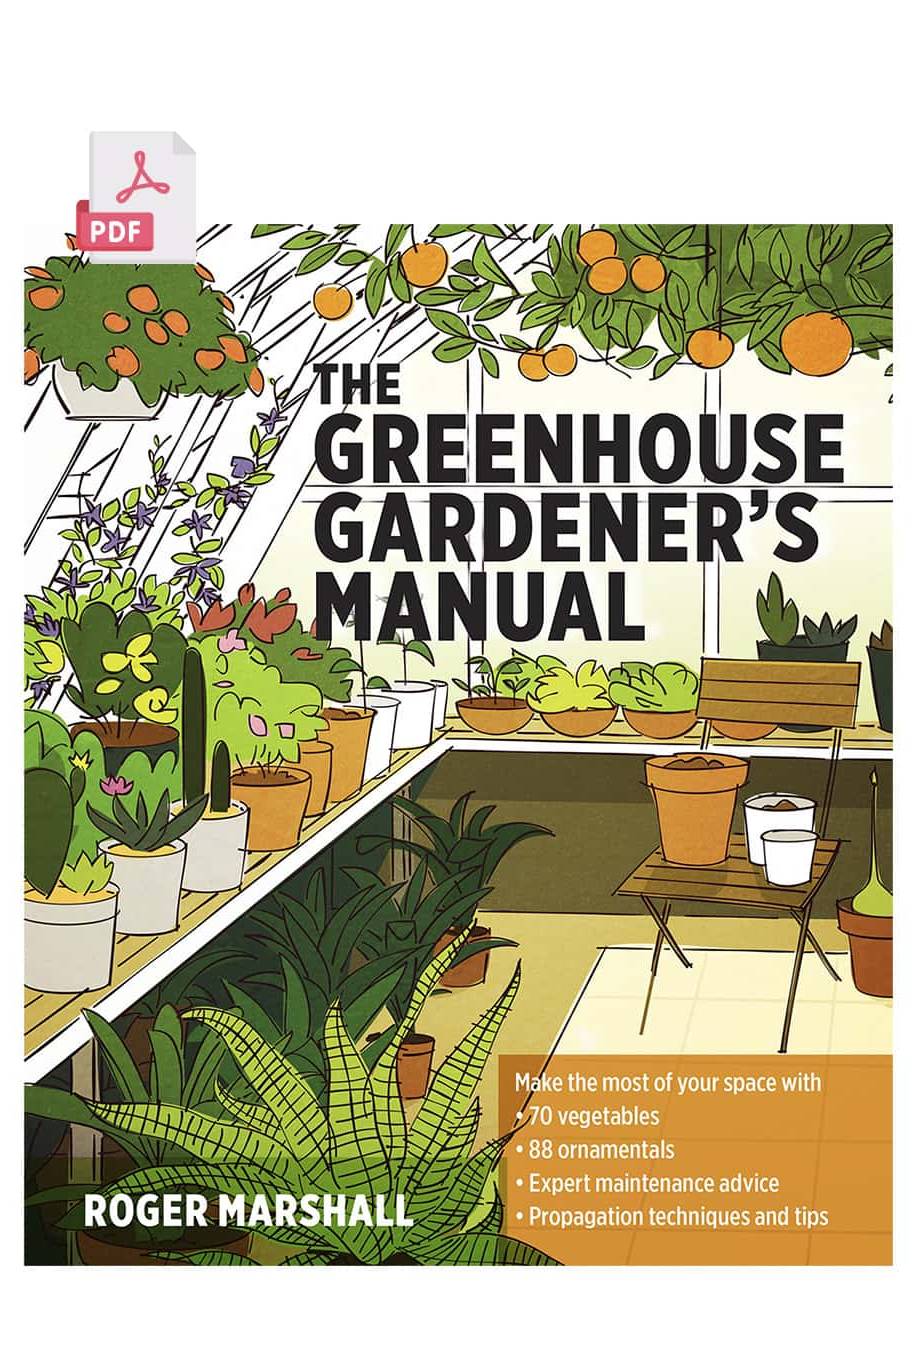 Greenhouse Gardener's Manual - 320 pages